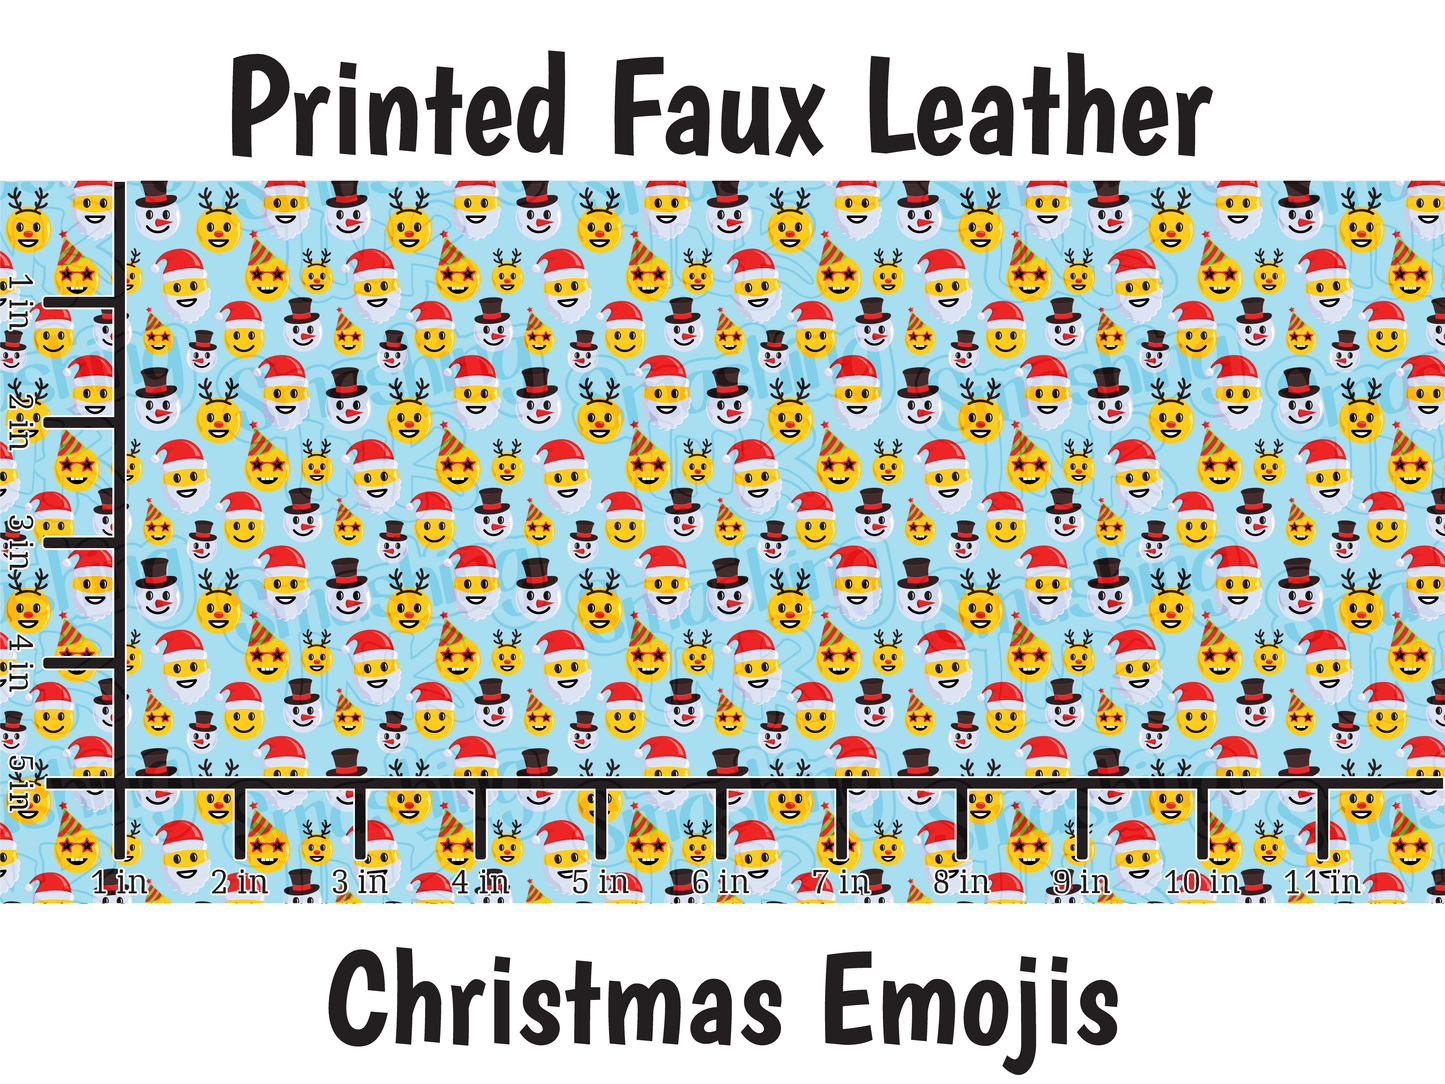 Christmas Emojis - Faux Leather Sheet (SHIPS IN 3 BUS DAYS)